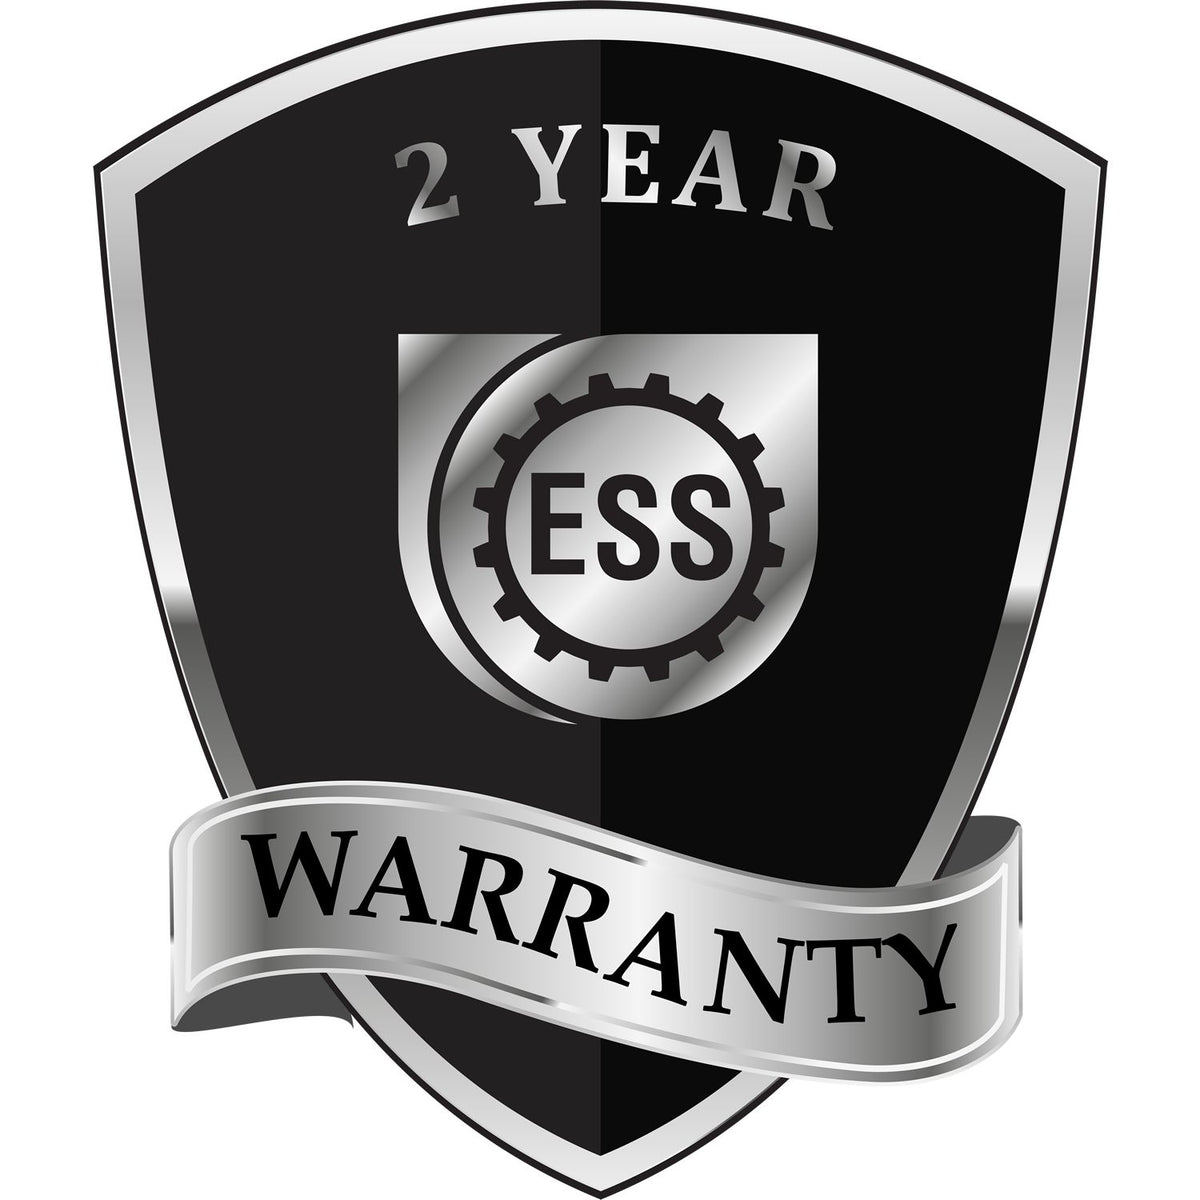 A black and silver badge or emblem showing warranty information for the Soft Maryland Professional Geologist Seal